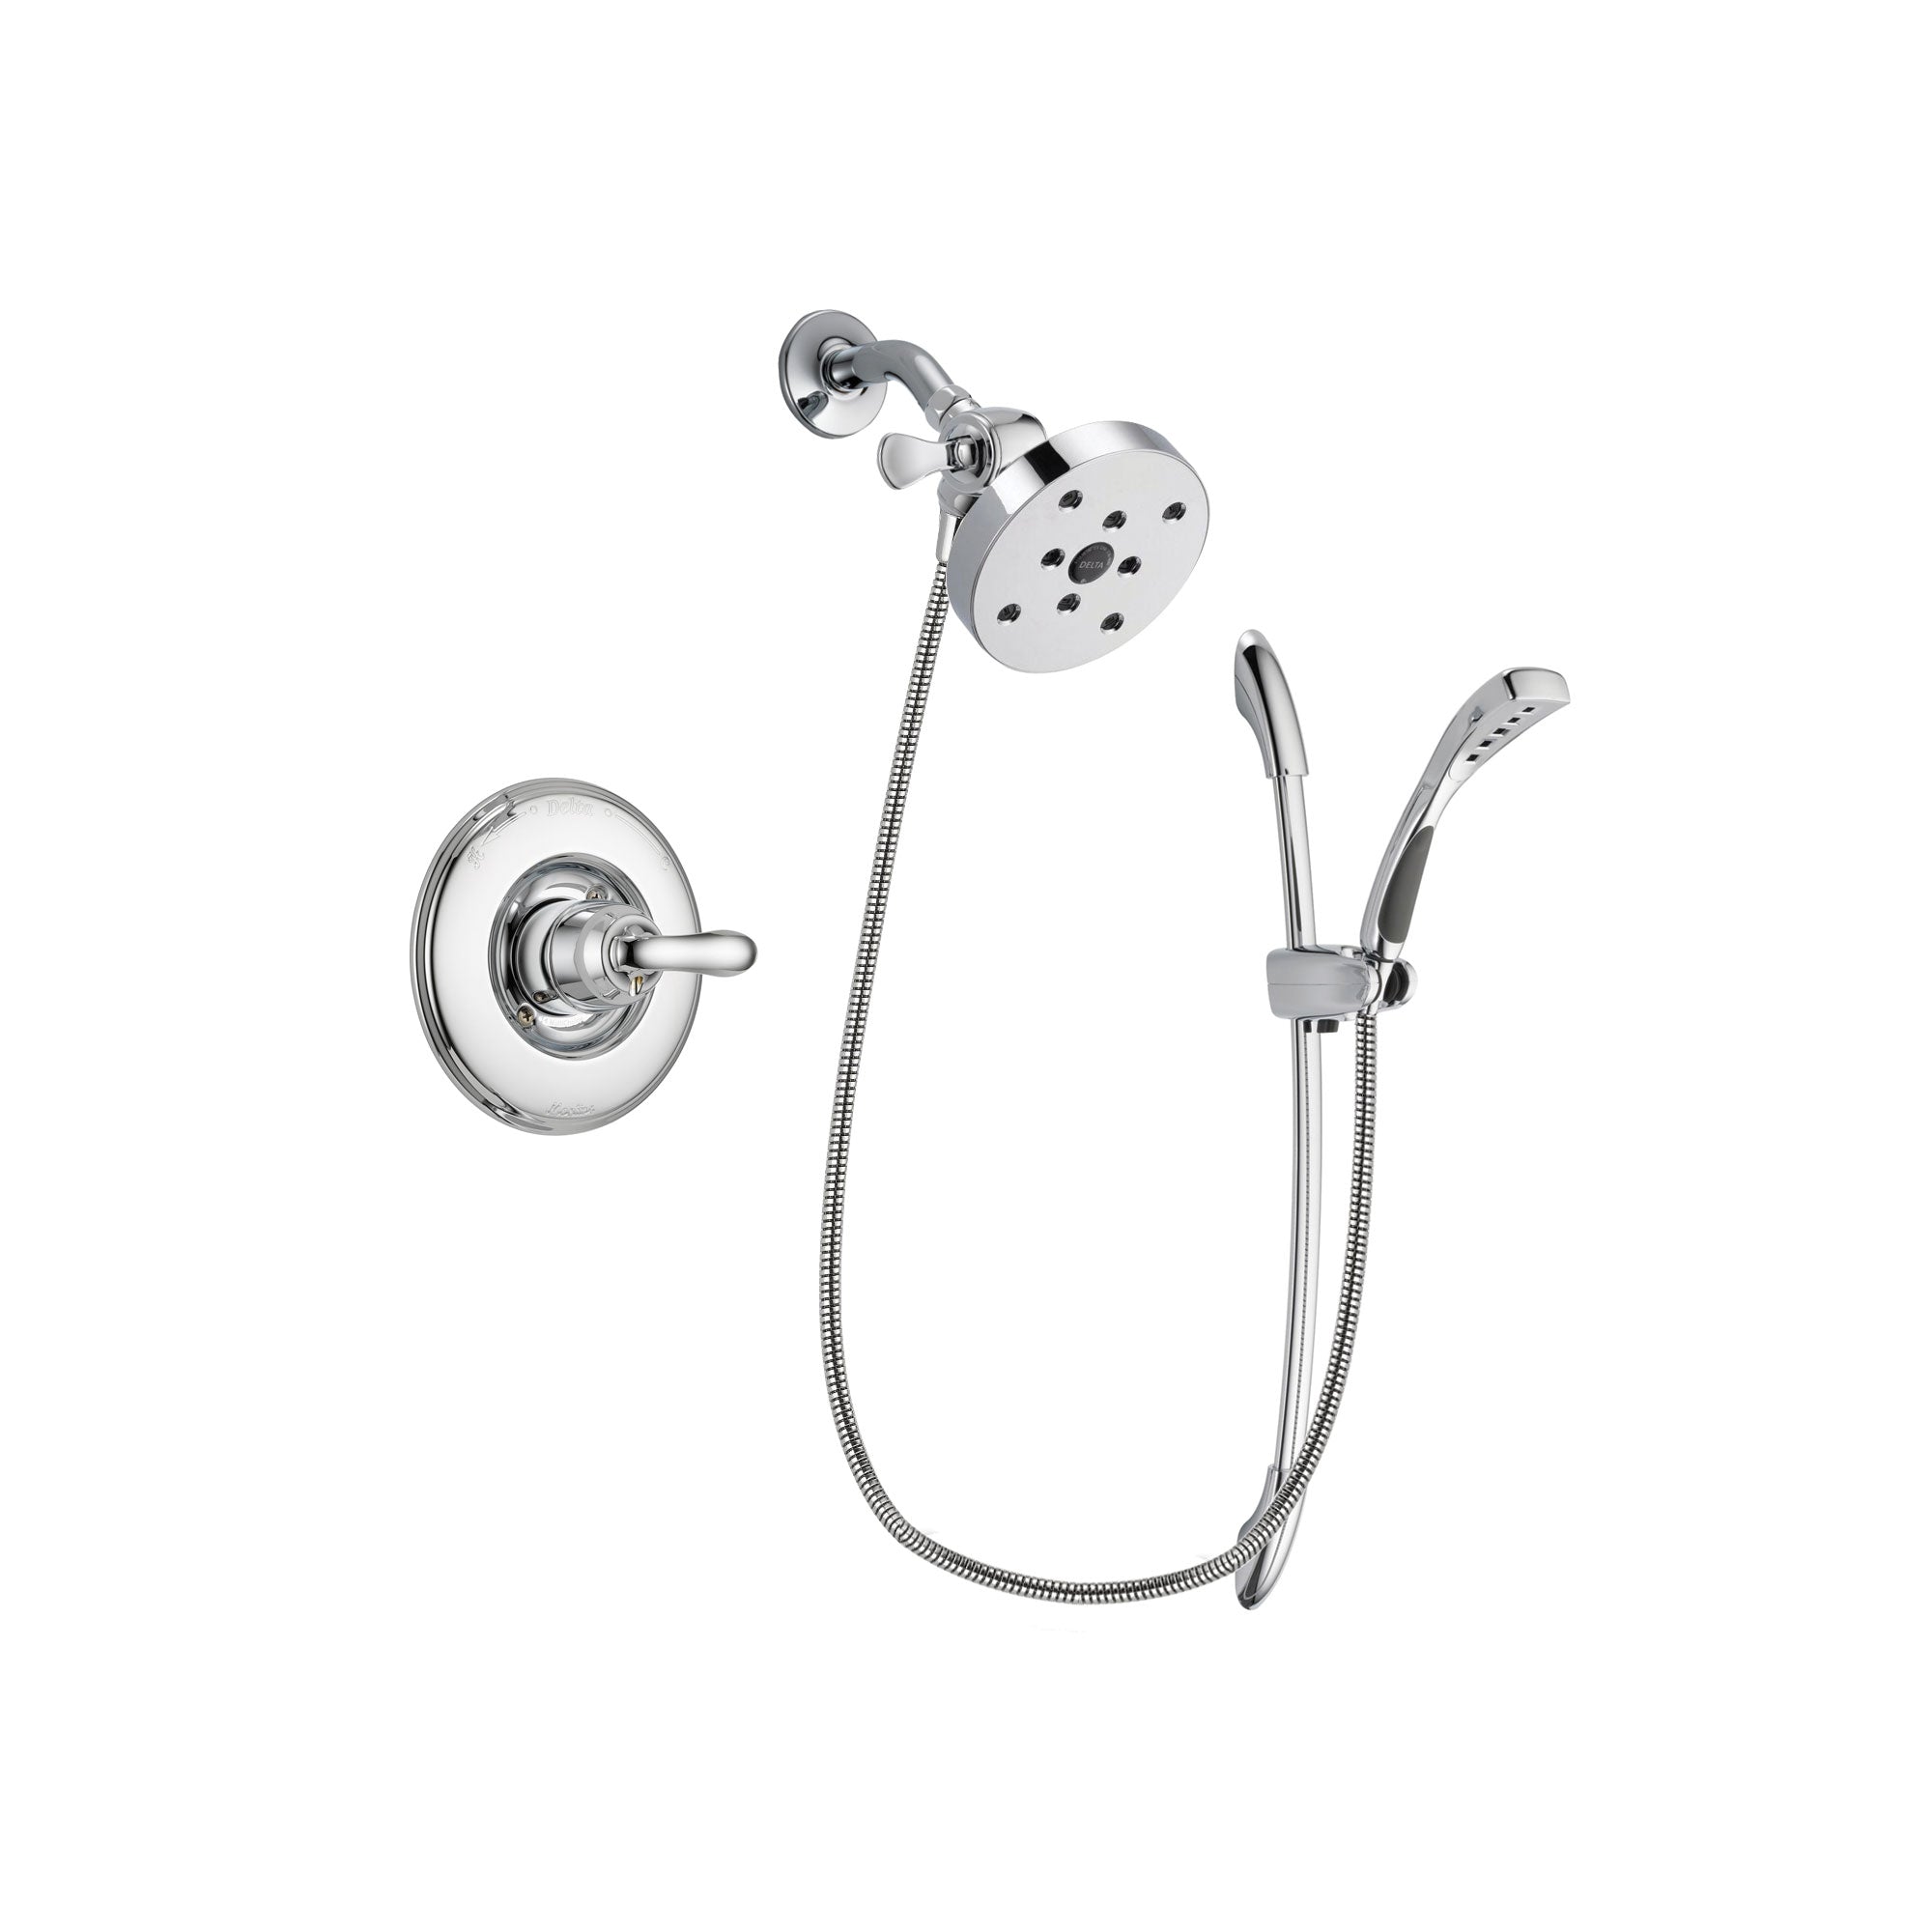 Delta Linden Chrome Finish Shower Faucet System Package with 5-1/2 inch Shower Head and Handheld Shower with Slide Bar Includes Rough-in Valve DSP0546V